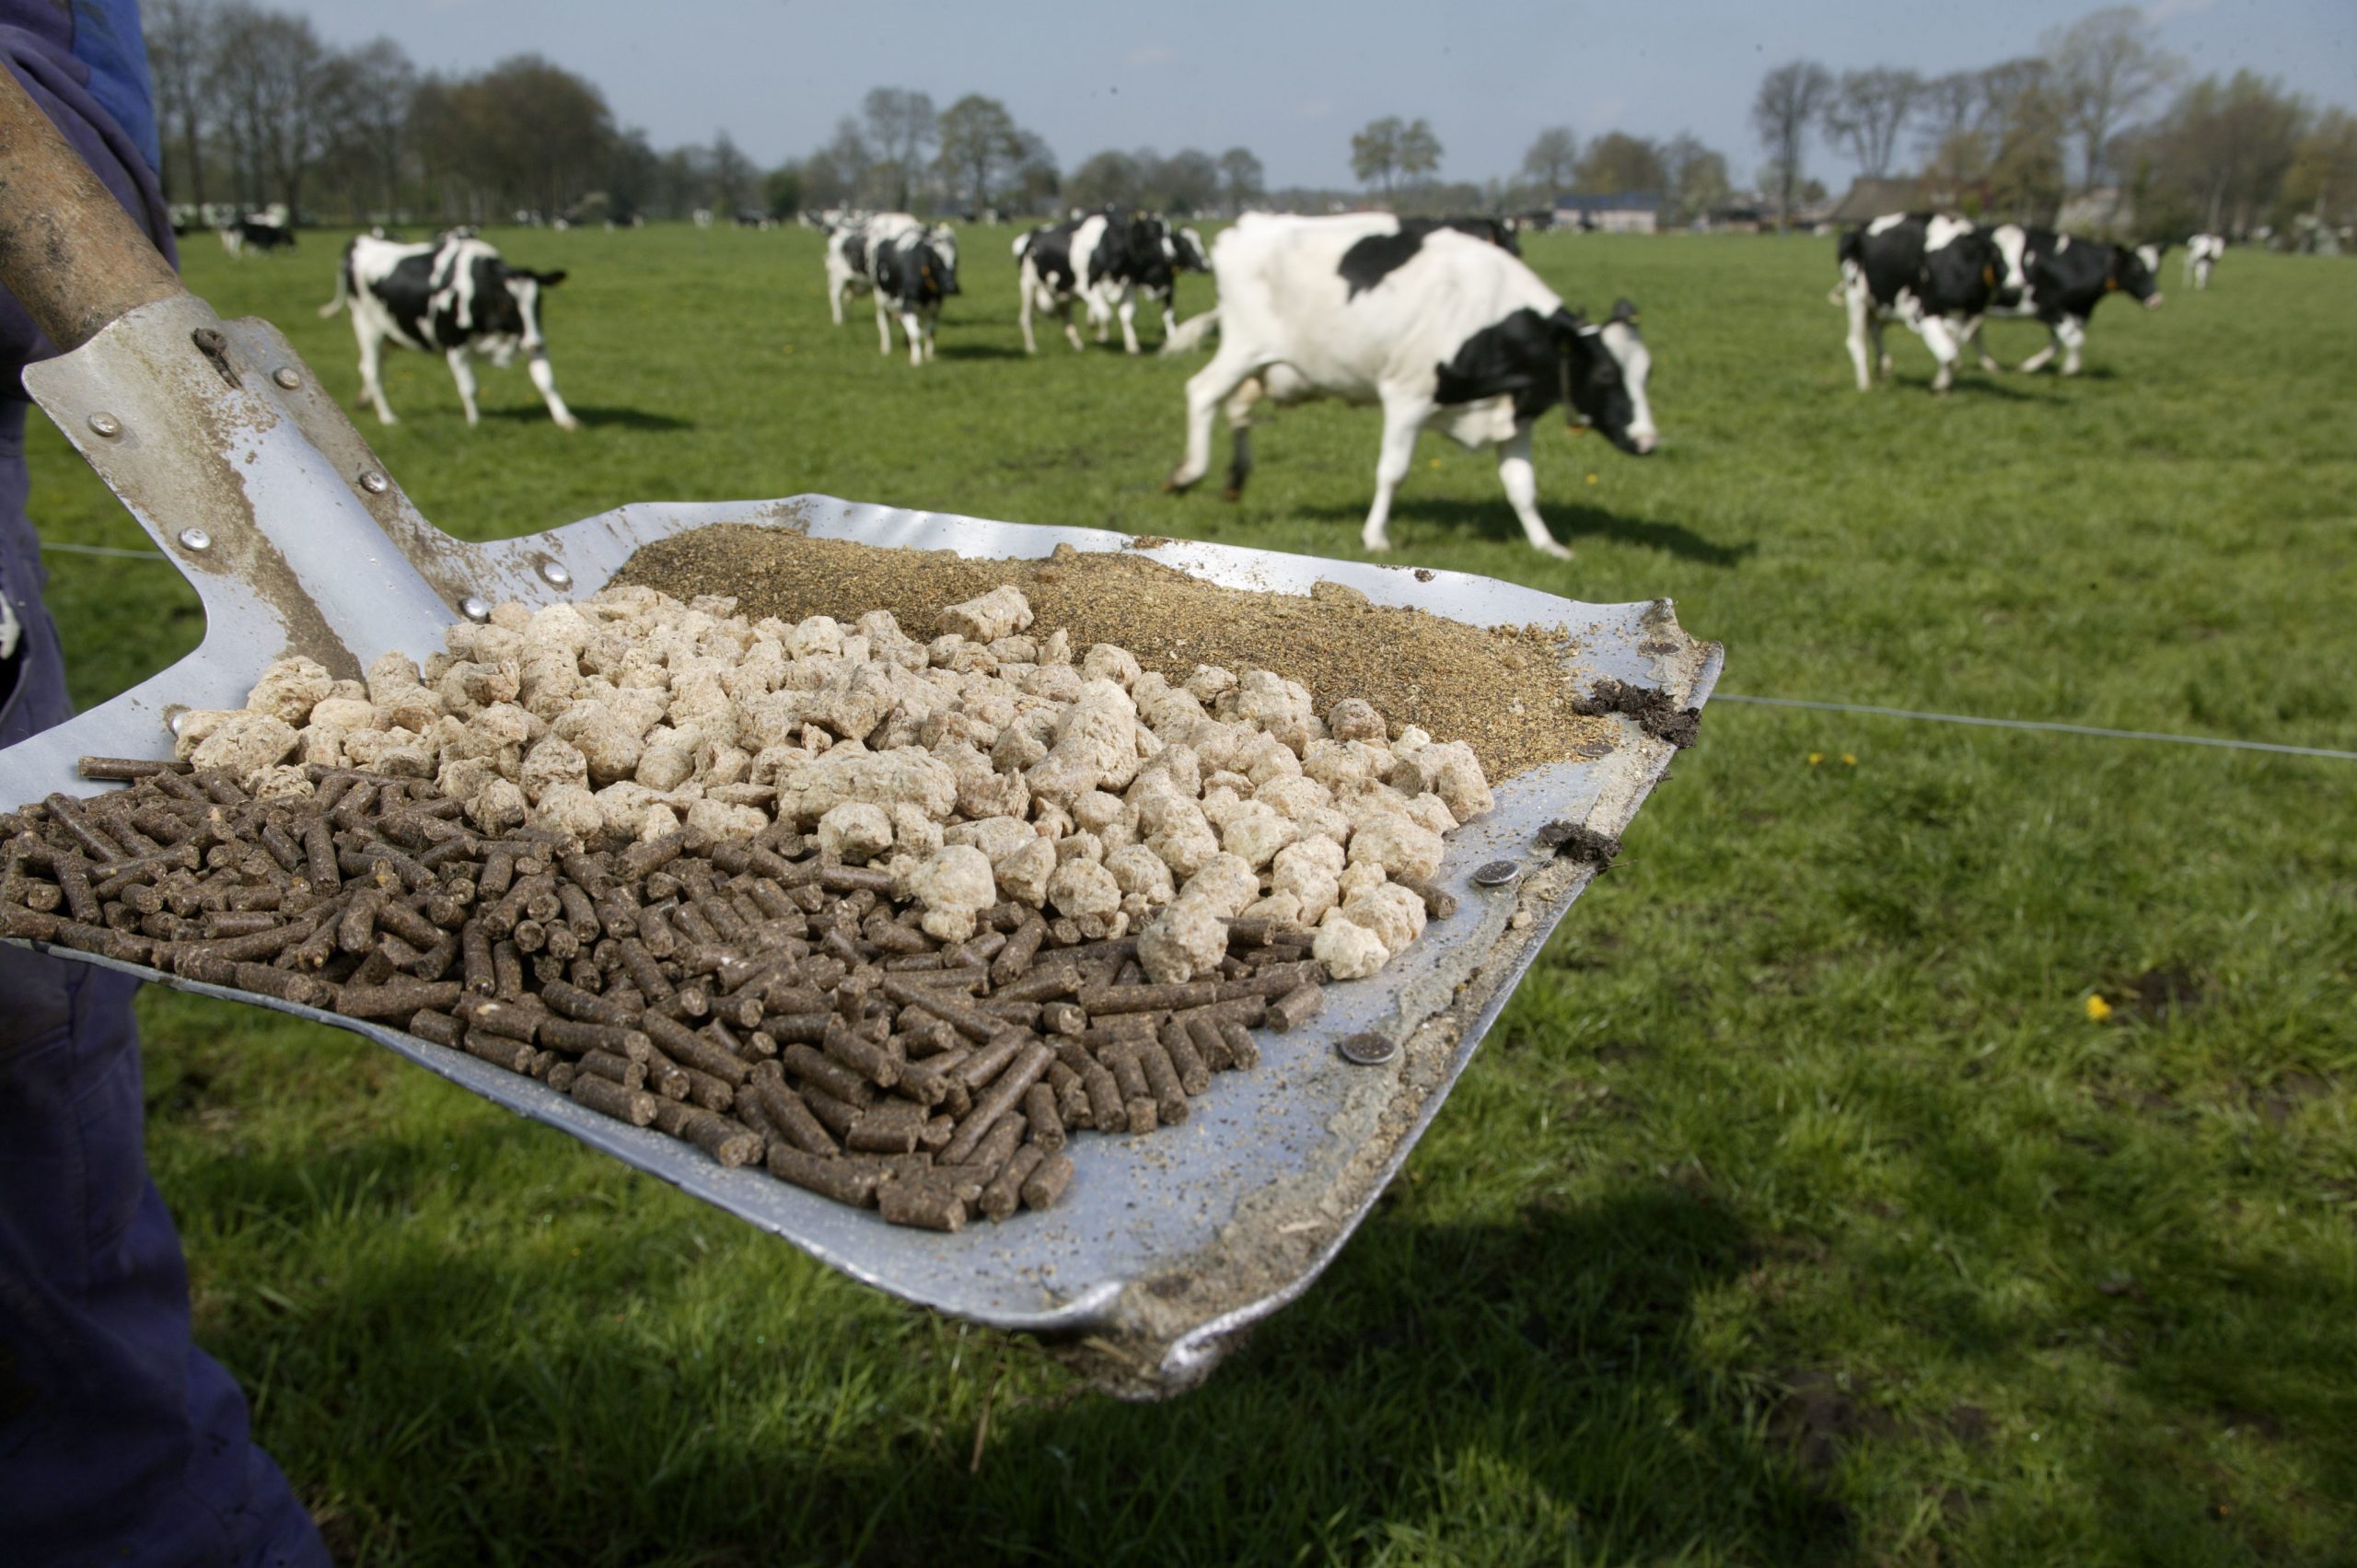 Nutrient content variability (inconsistency) of feed ingredients is frequently mentioned as a constraint by dairy producers and nutrition consultants. Photo: Hans Prinsen